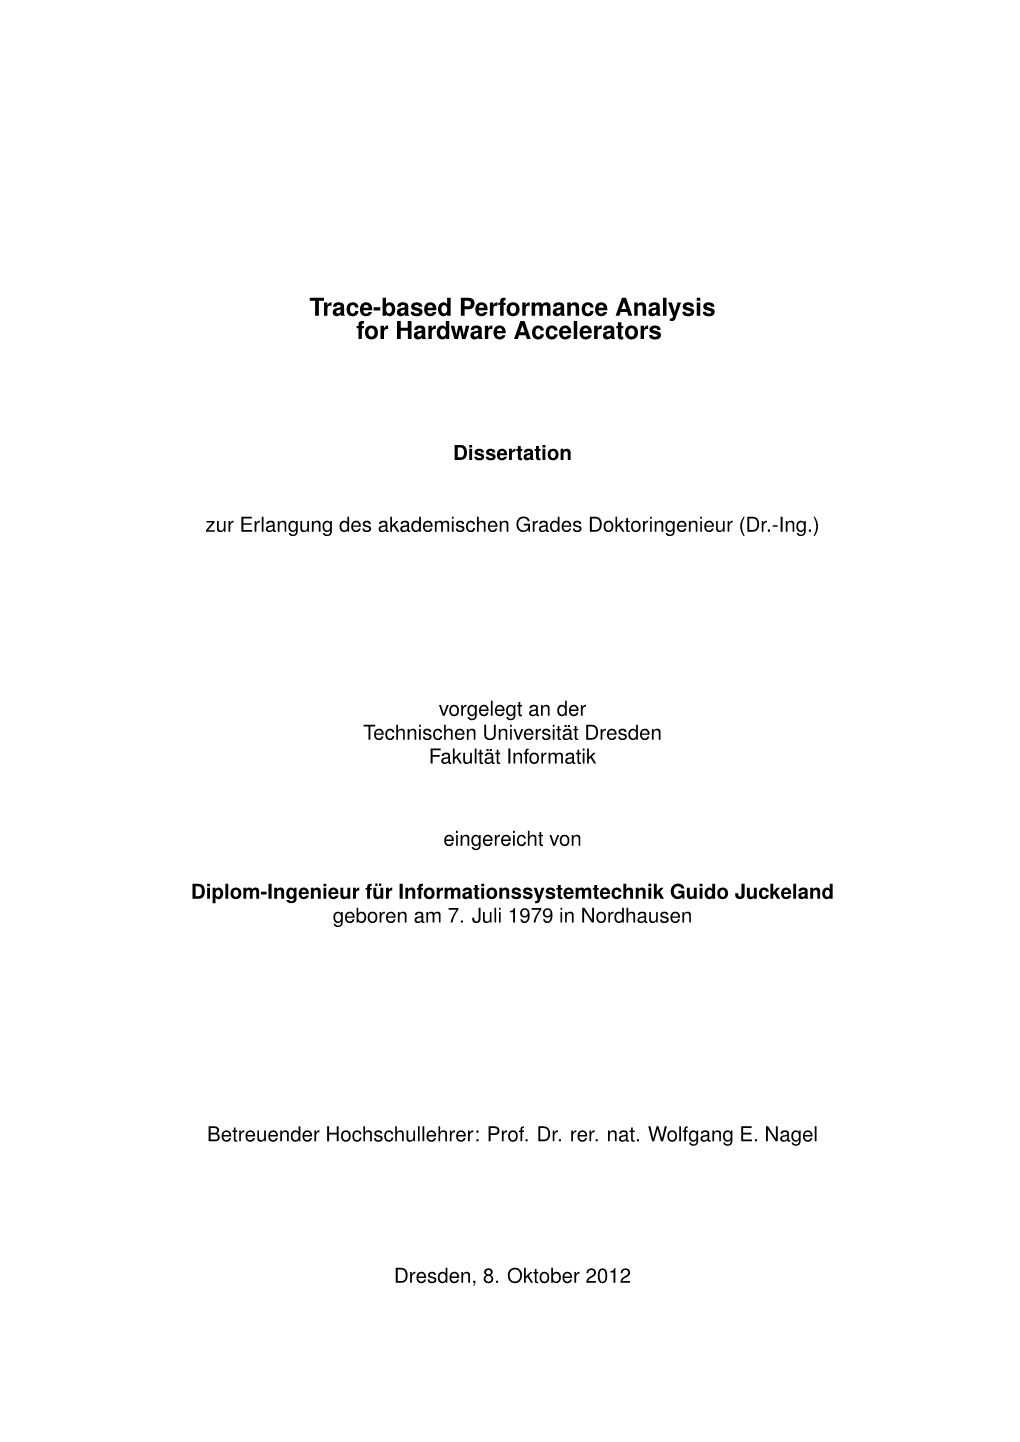 Trace-Based Performance Analysis for Hardware Accelerators